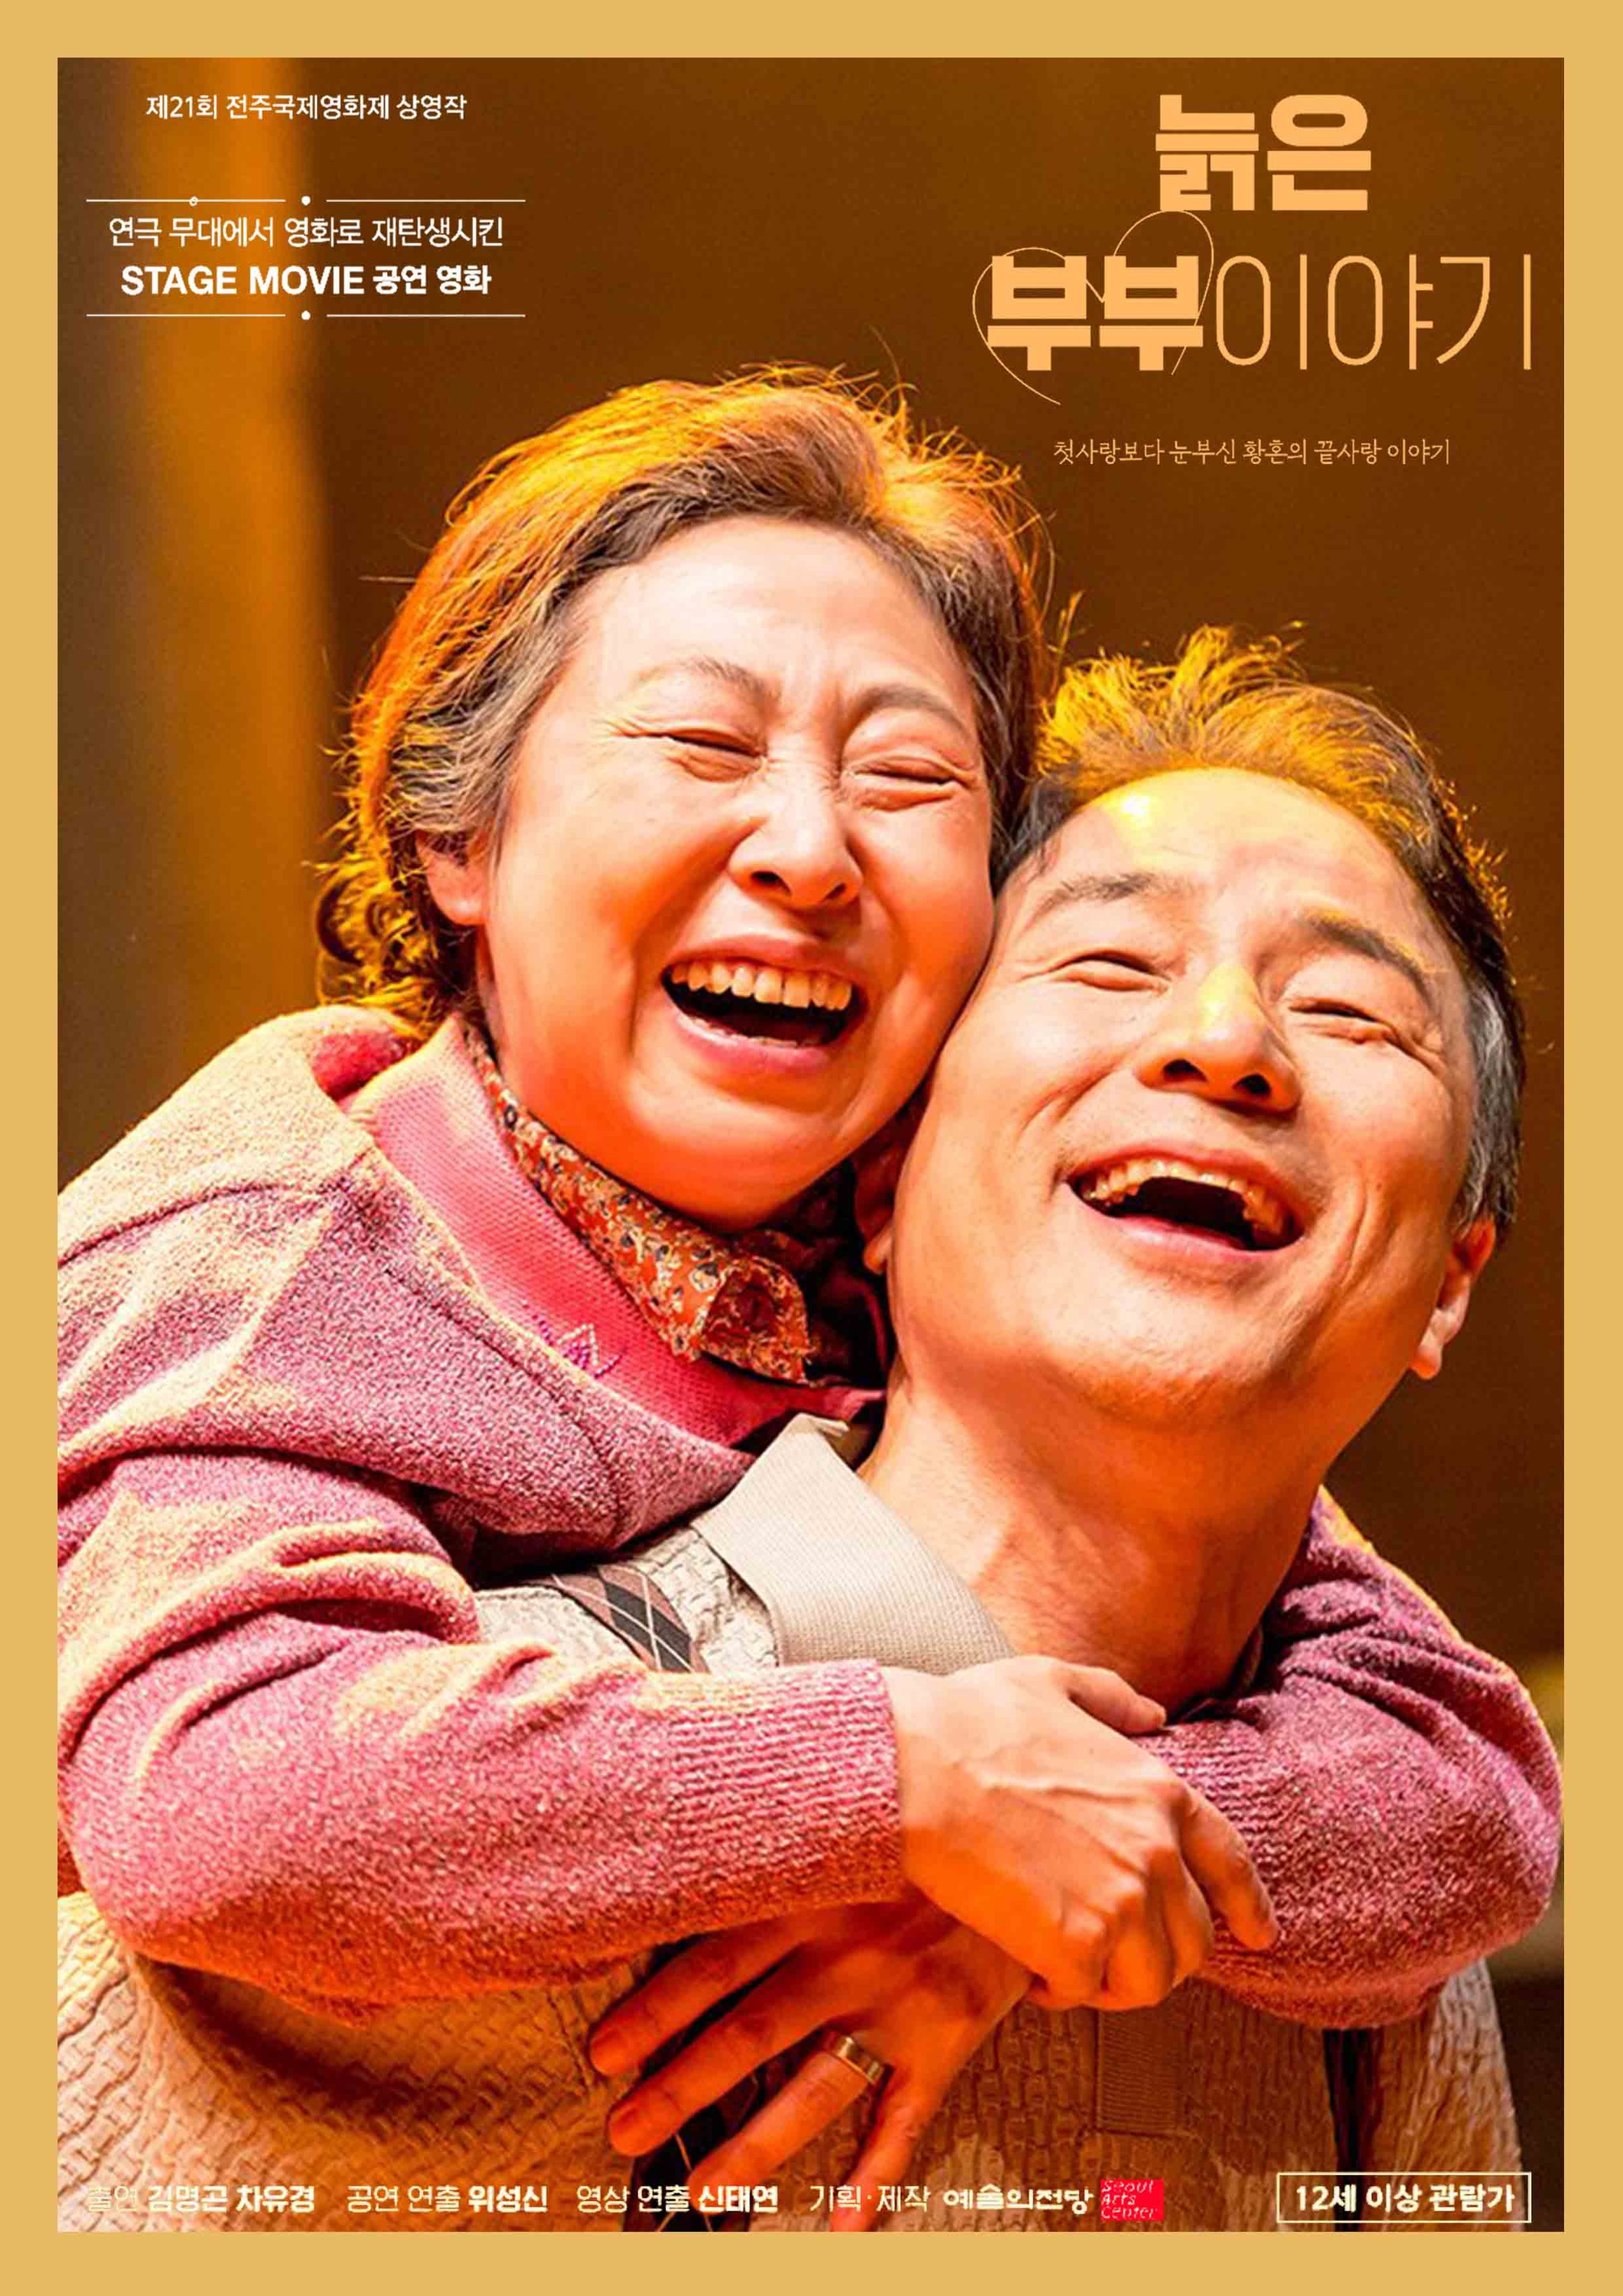 Mega Sized Movie Poster Image for The Story of an Old Couple: Stage Movie 